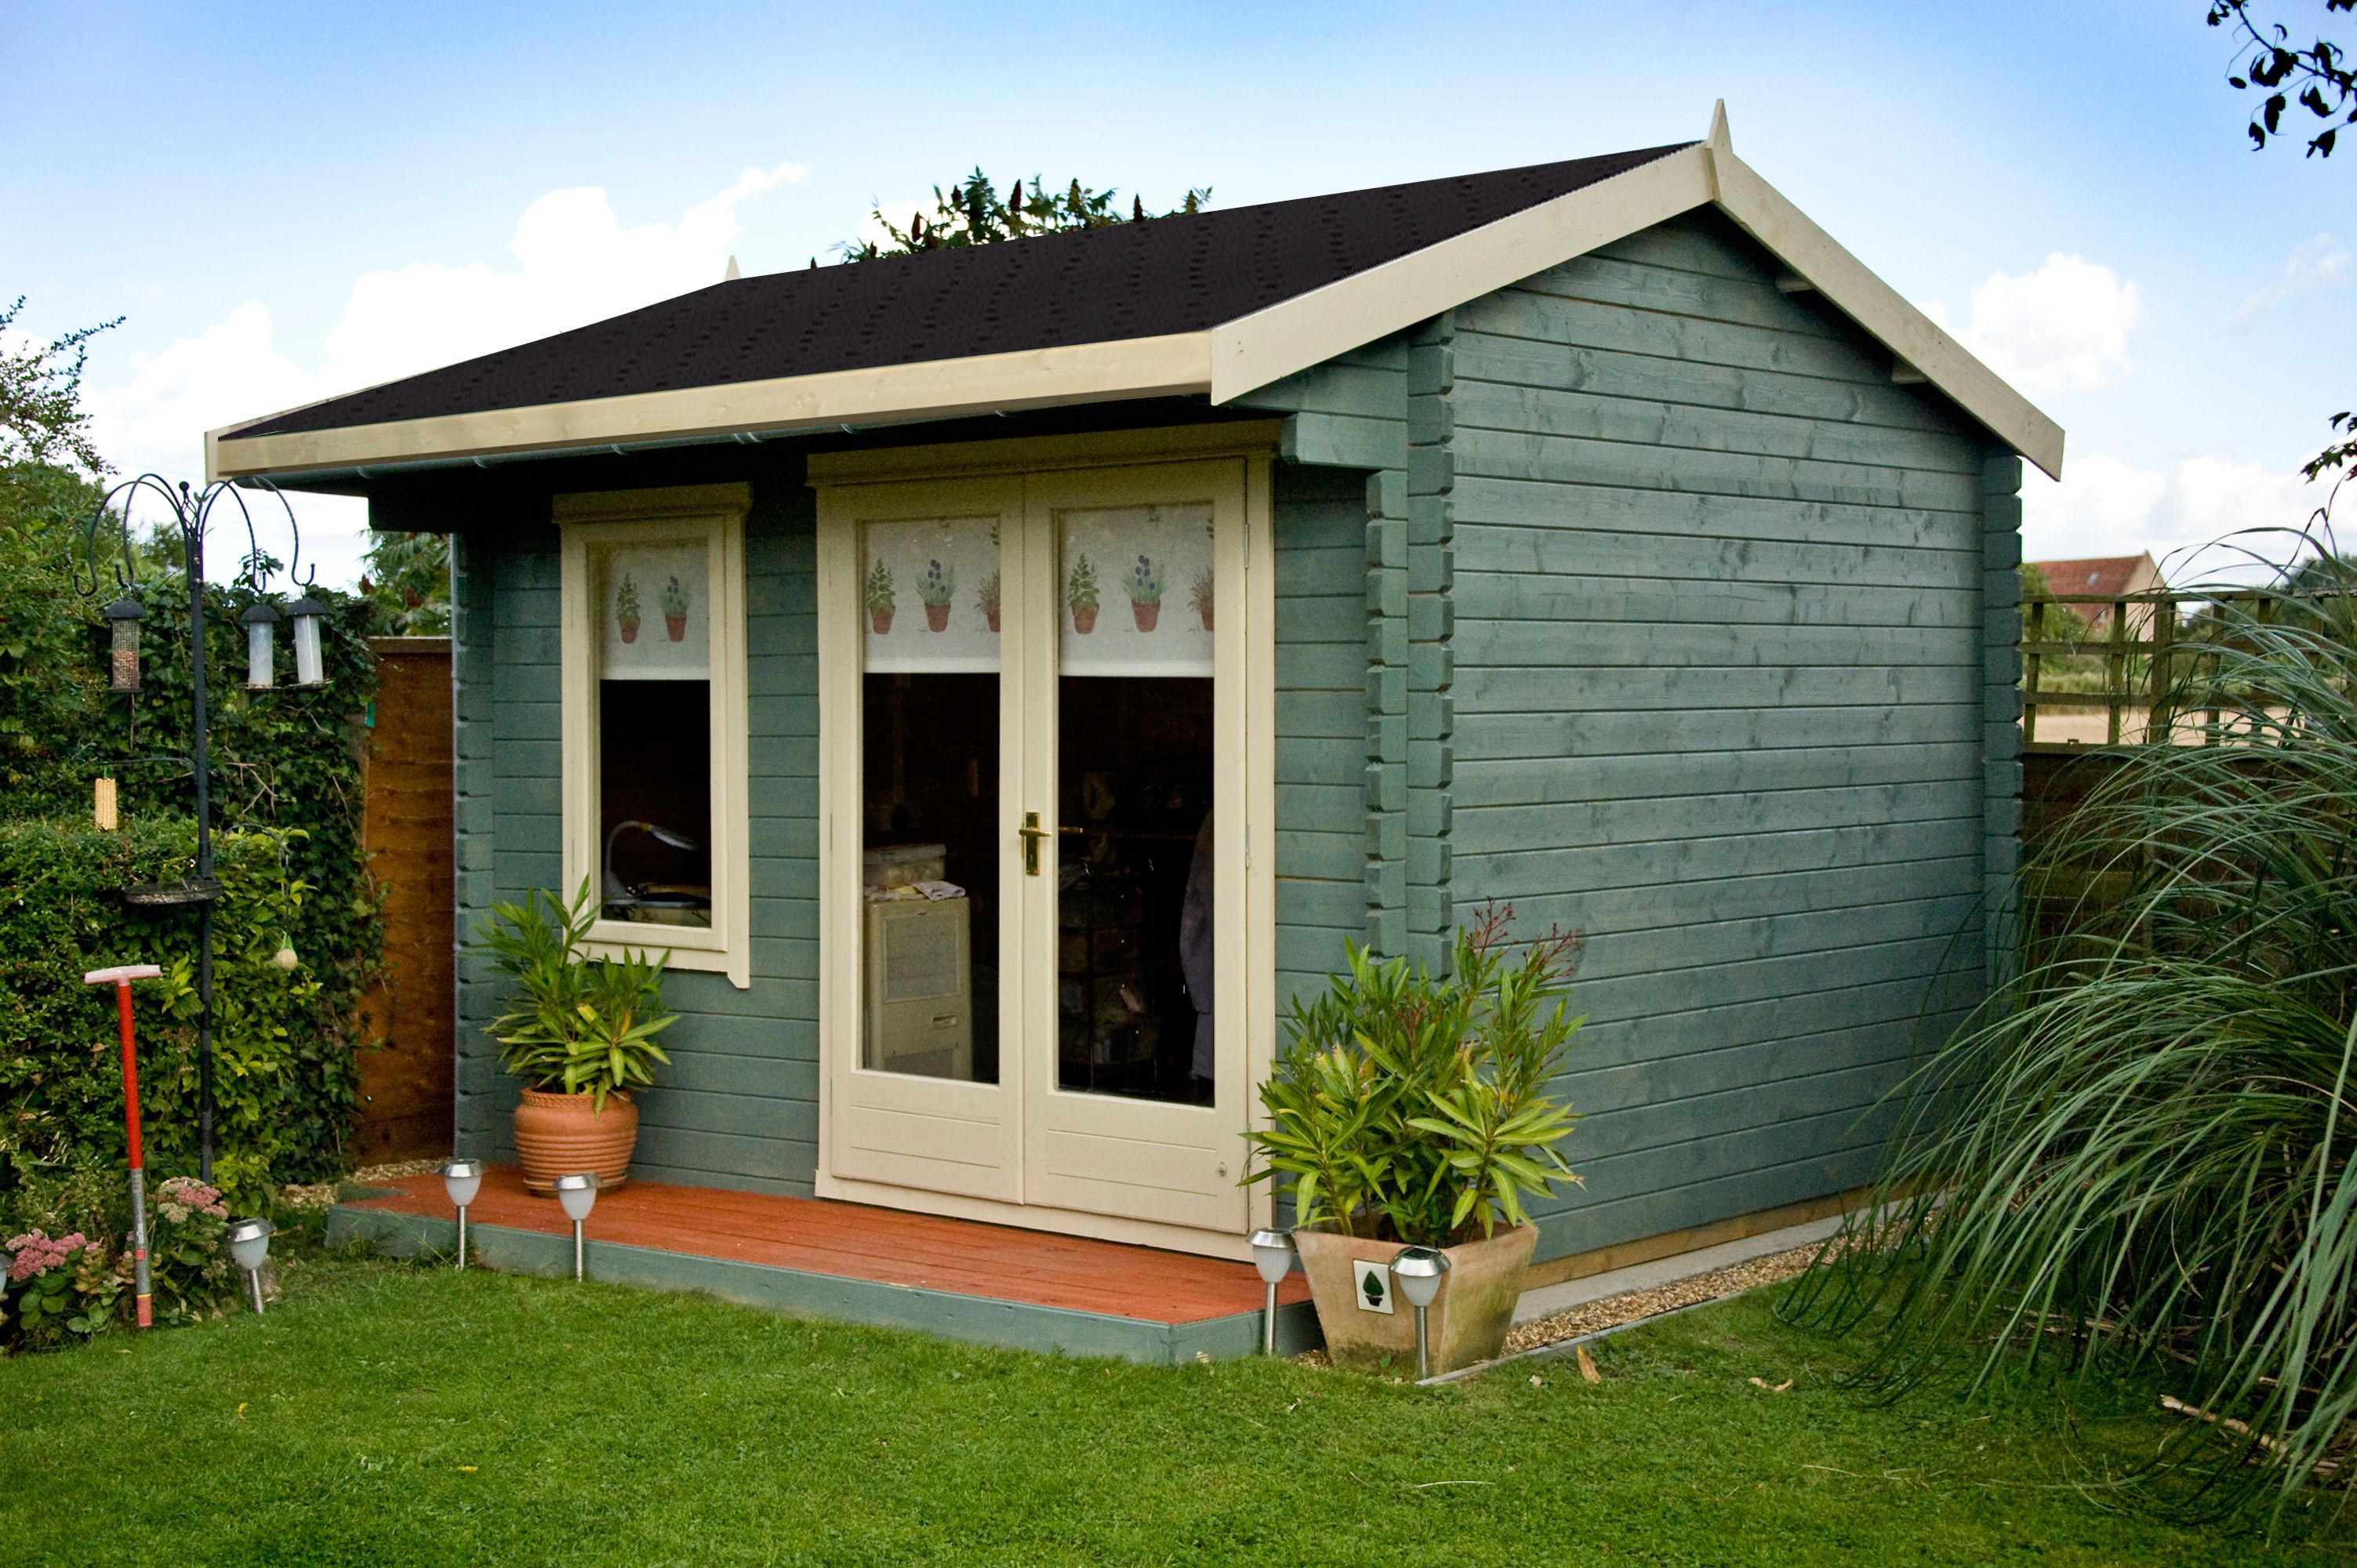 Shire Marlborough 12x14 ft Apex Wooden Cabin with Felt tile roof - Assembly service included